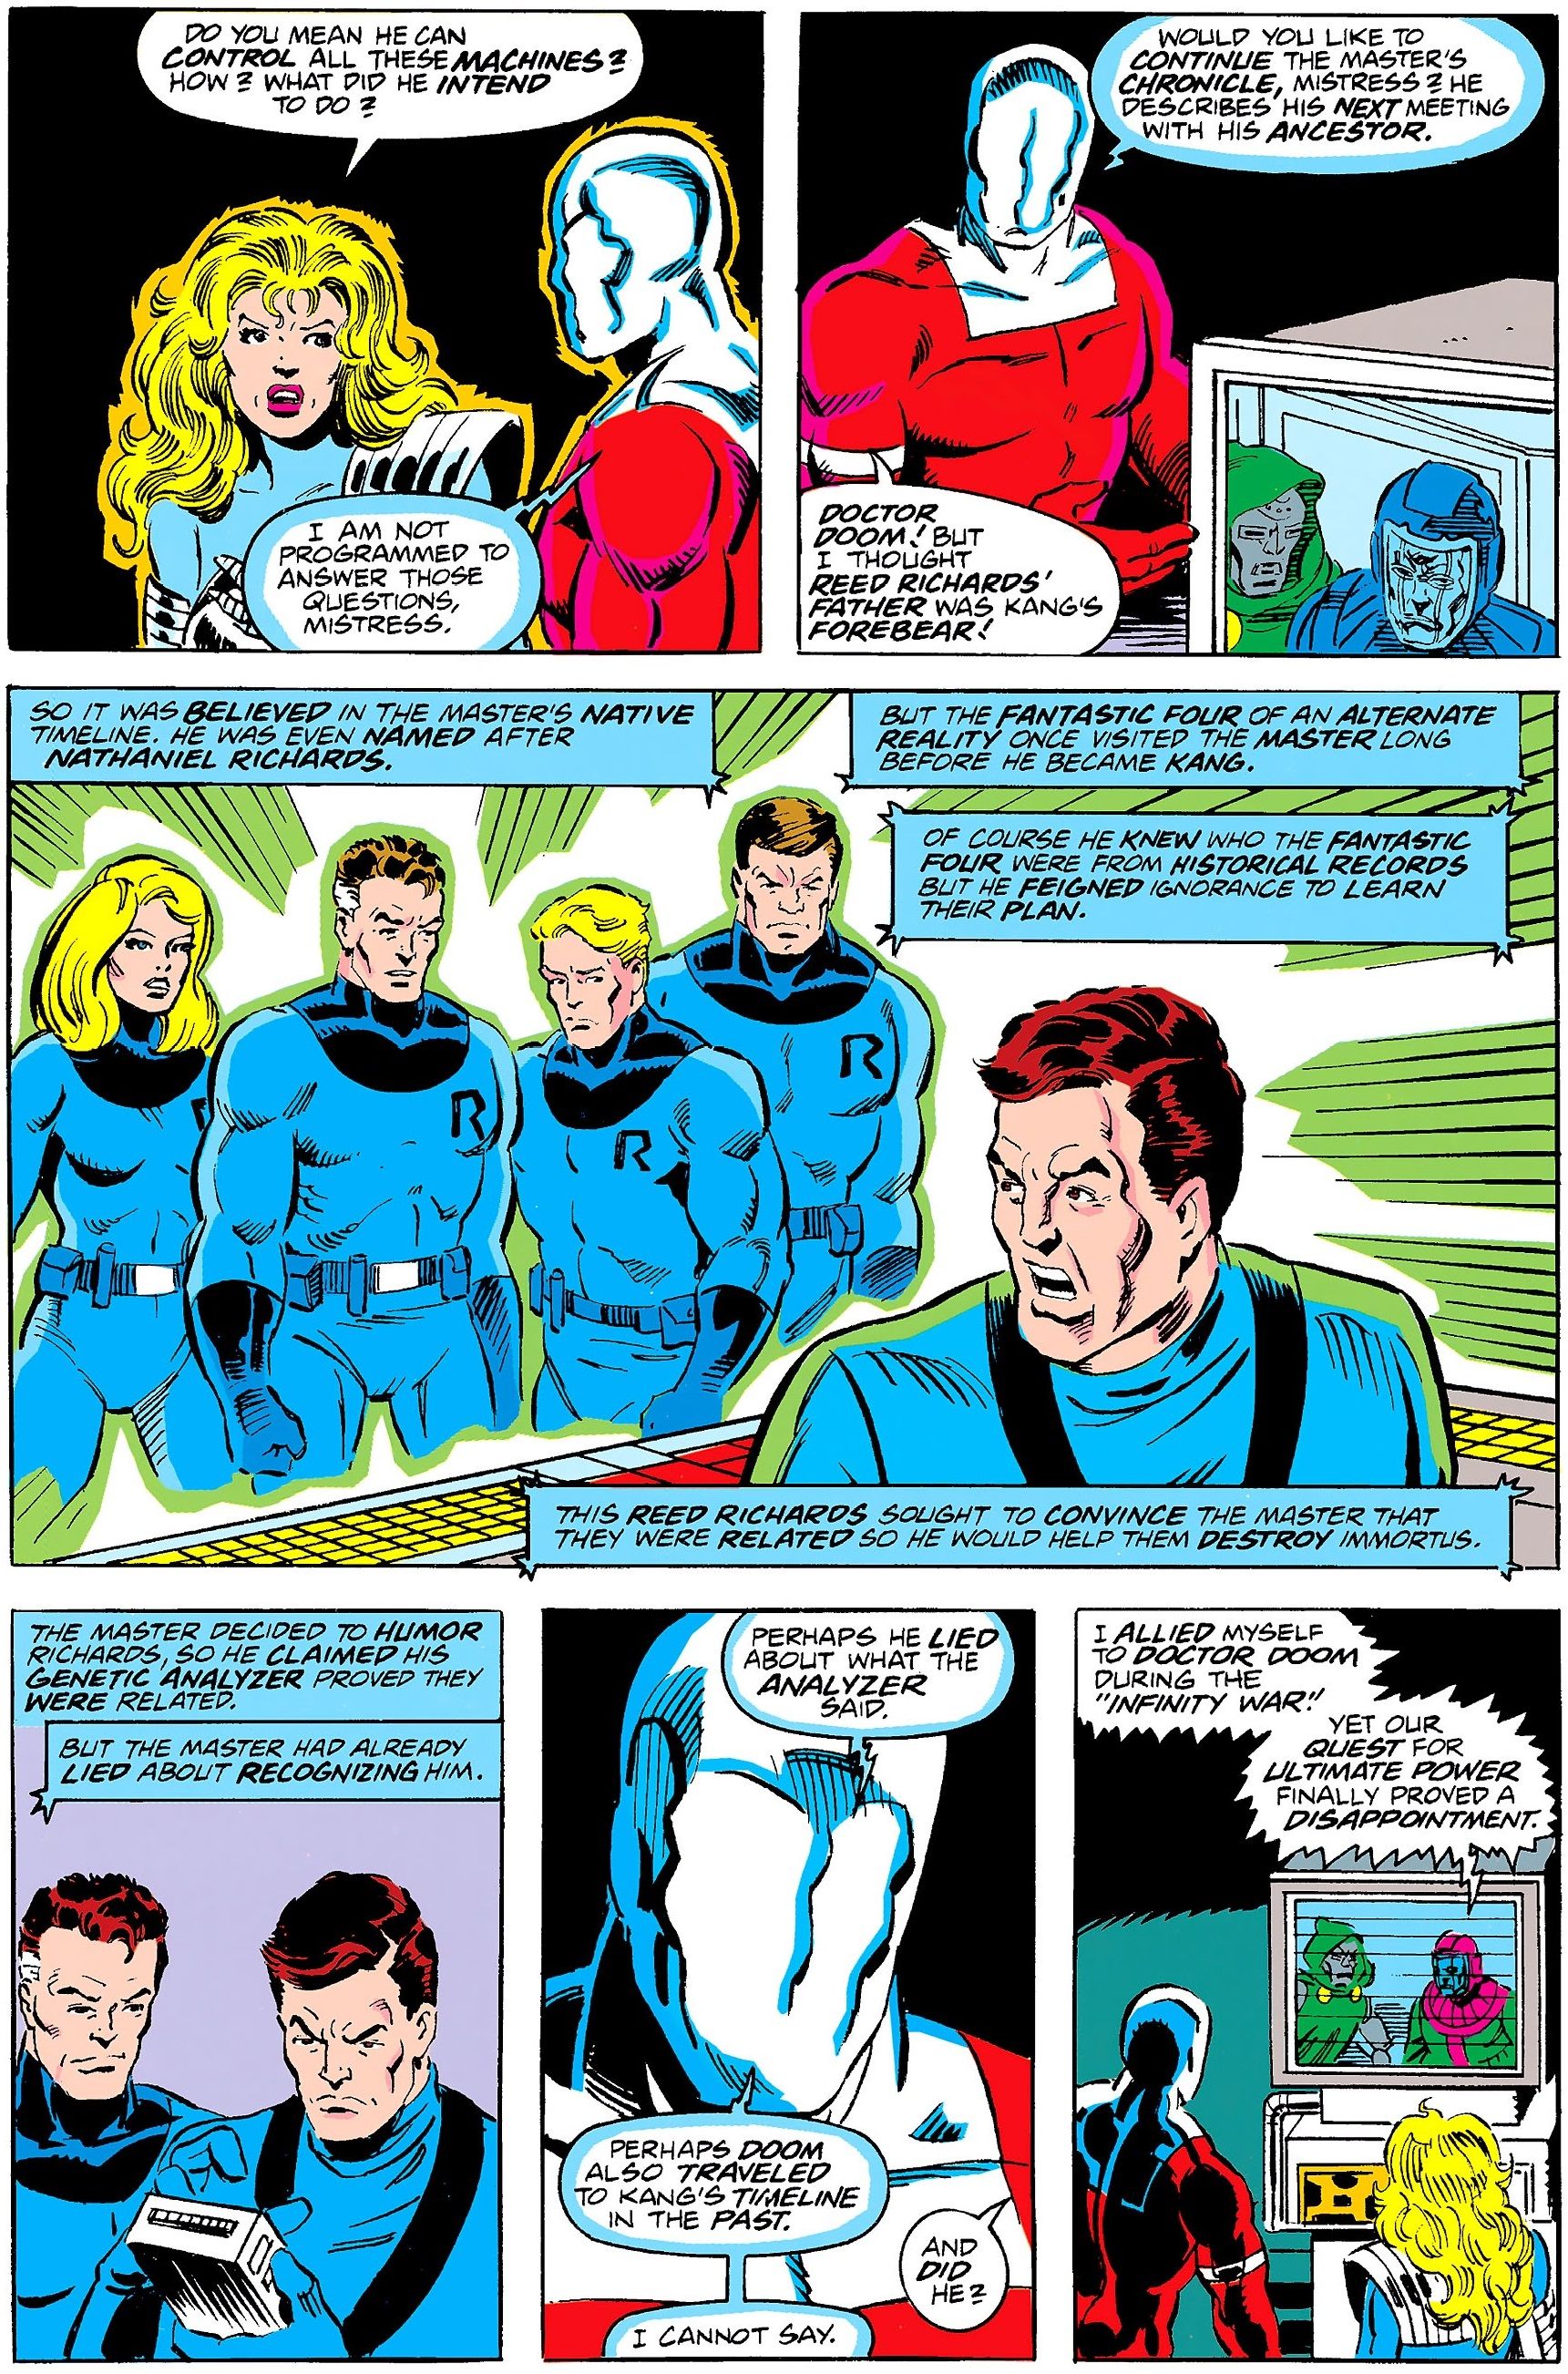 A robot explains how the Fantastic Four from another reality tricked Nathaniel Richards